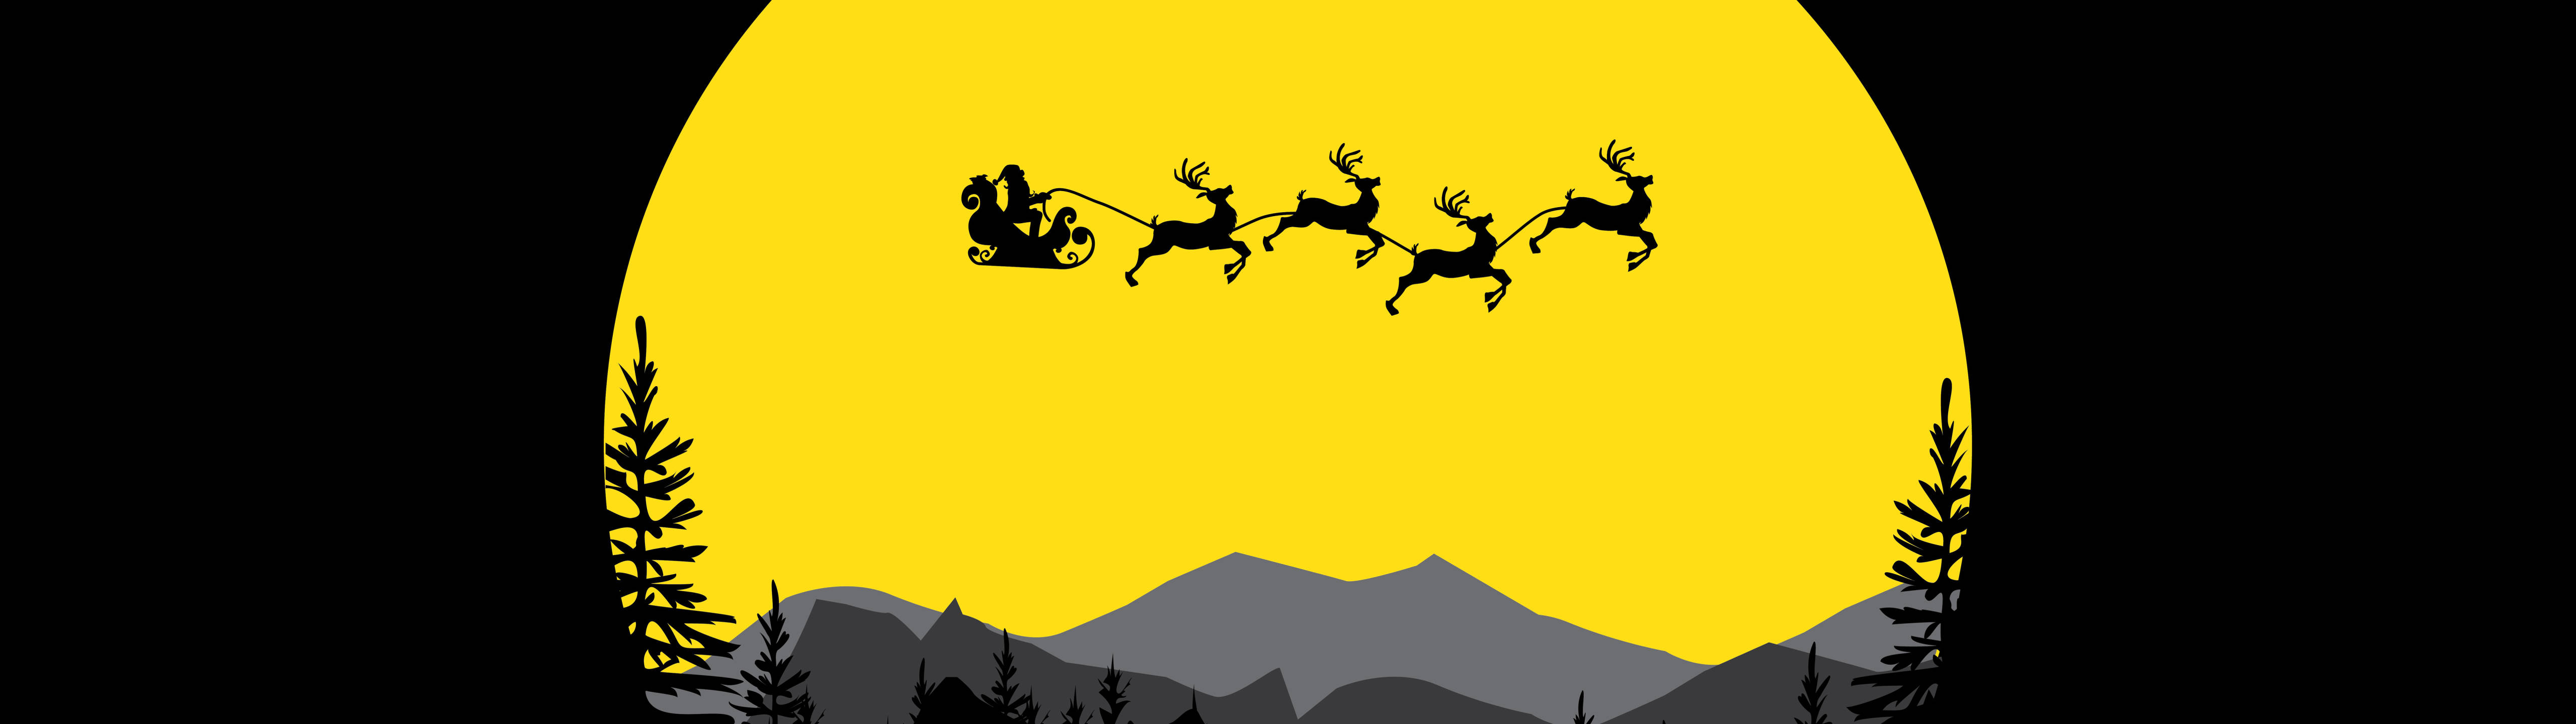 Santa Claus Flying Over The Mountains Wallpaper